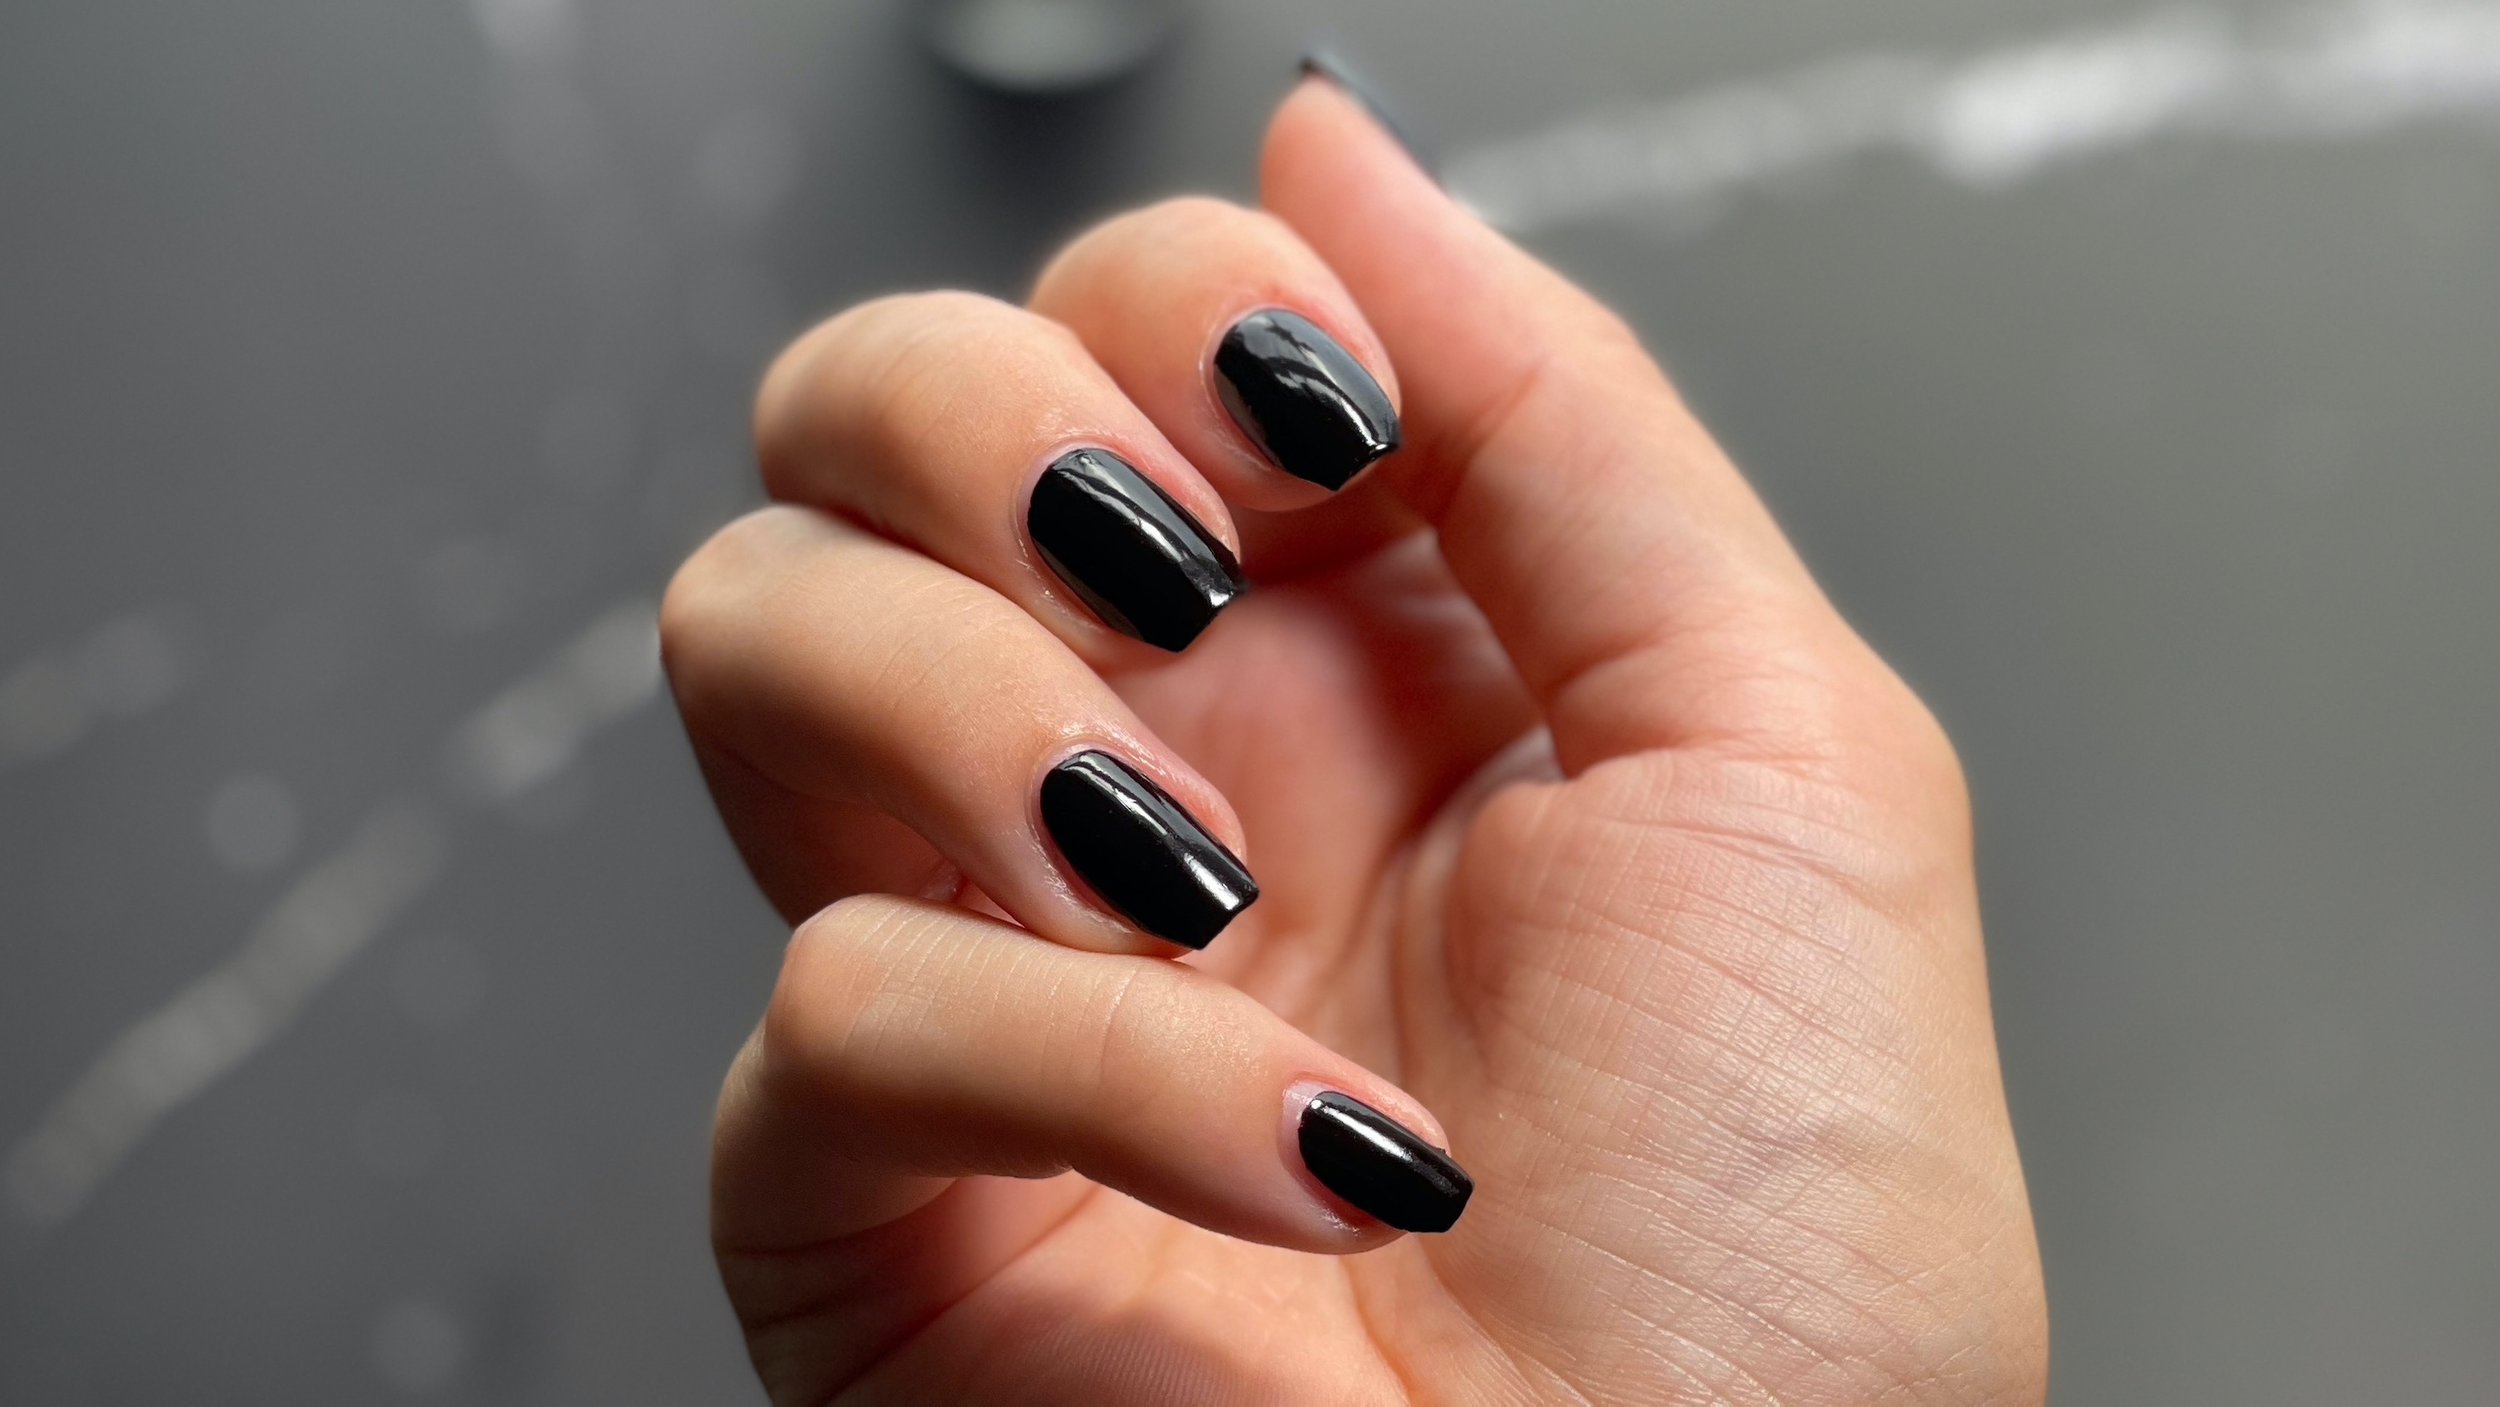 5. OPI Nail Lacquer in "Lincoln Park at Midnight" - wide 5